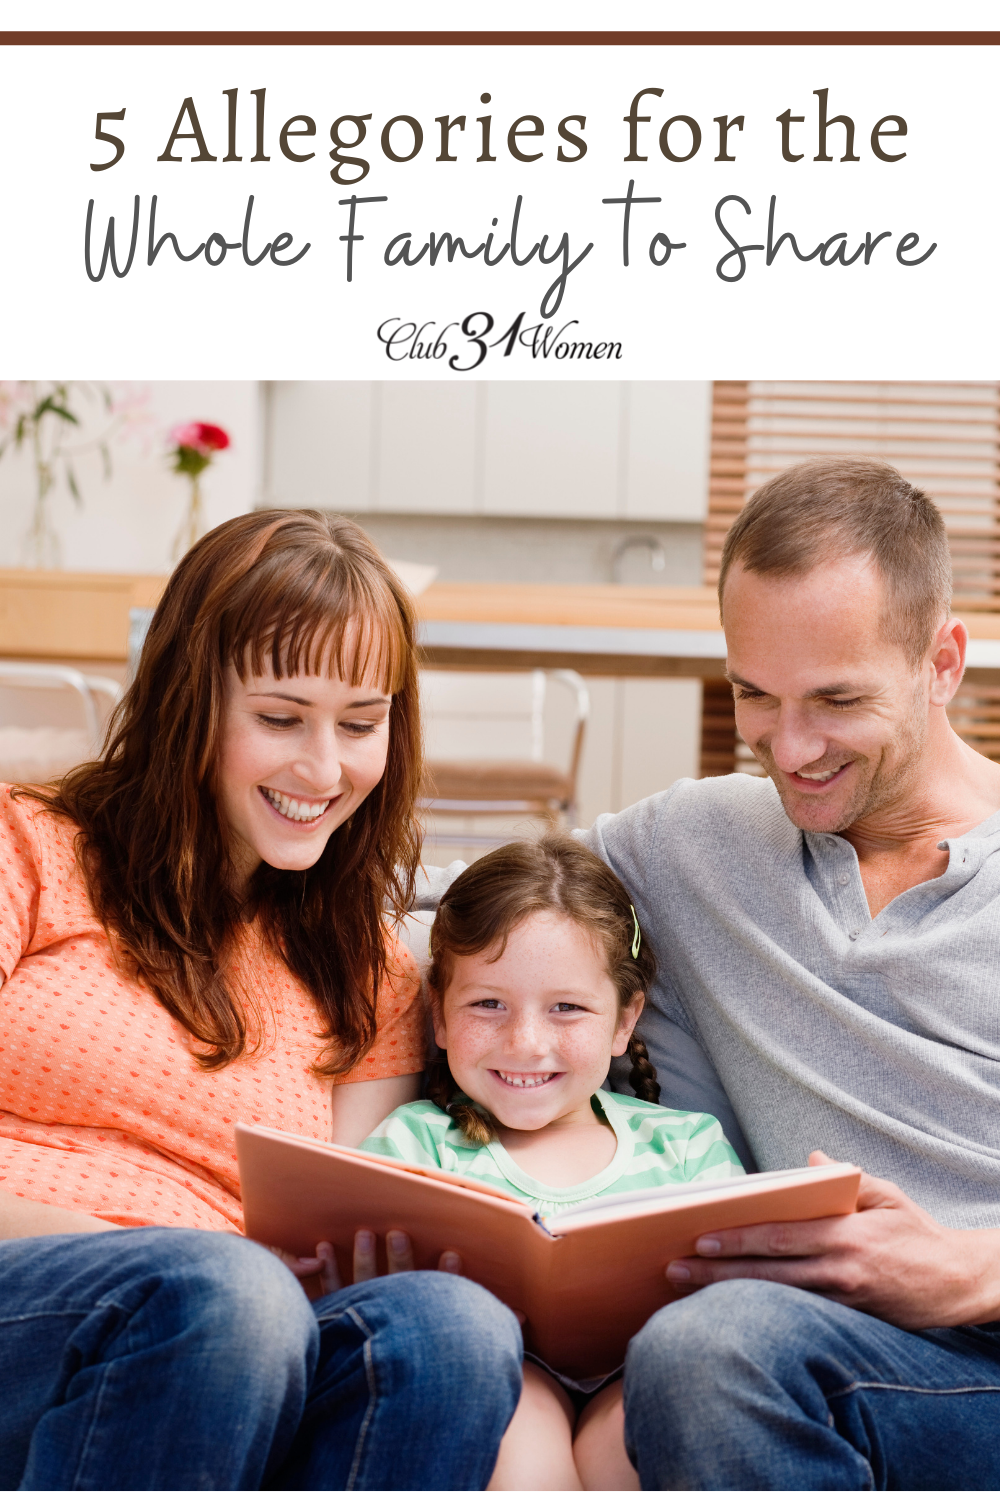 It's always fun to find a book the whole family will enjoy. This list of allegories are a delightful way to spend together as a family! via @Club31Women